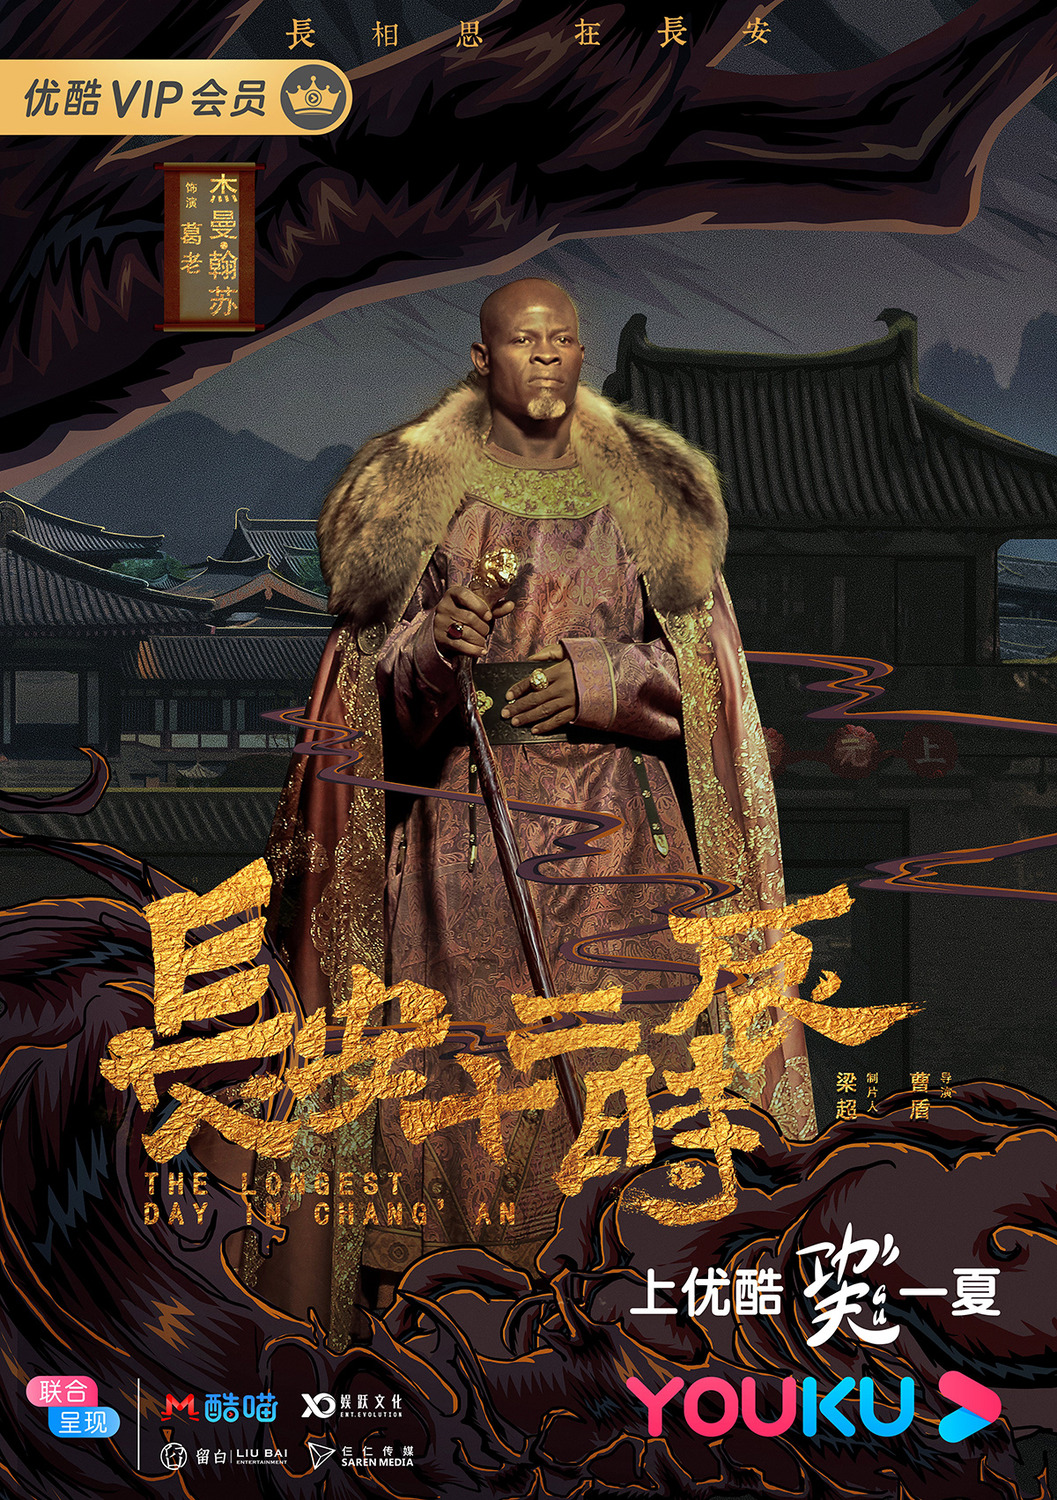 Extra Large TV Poster Image for Chang'an shi er shi chen (#2 of 18)